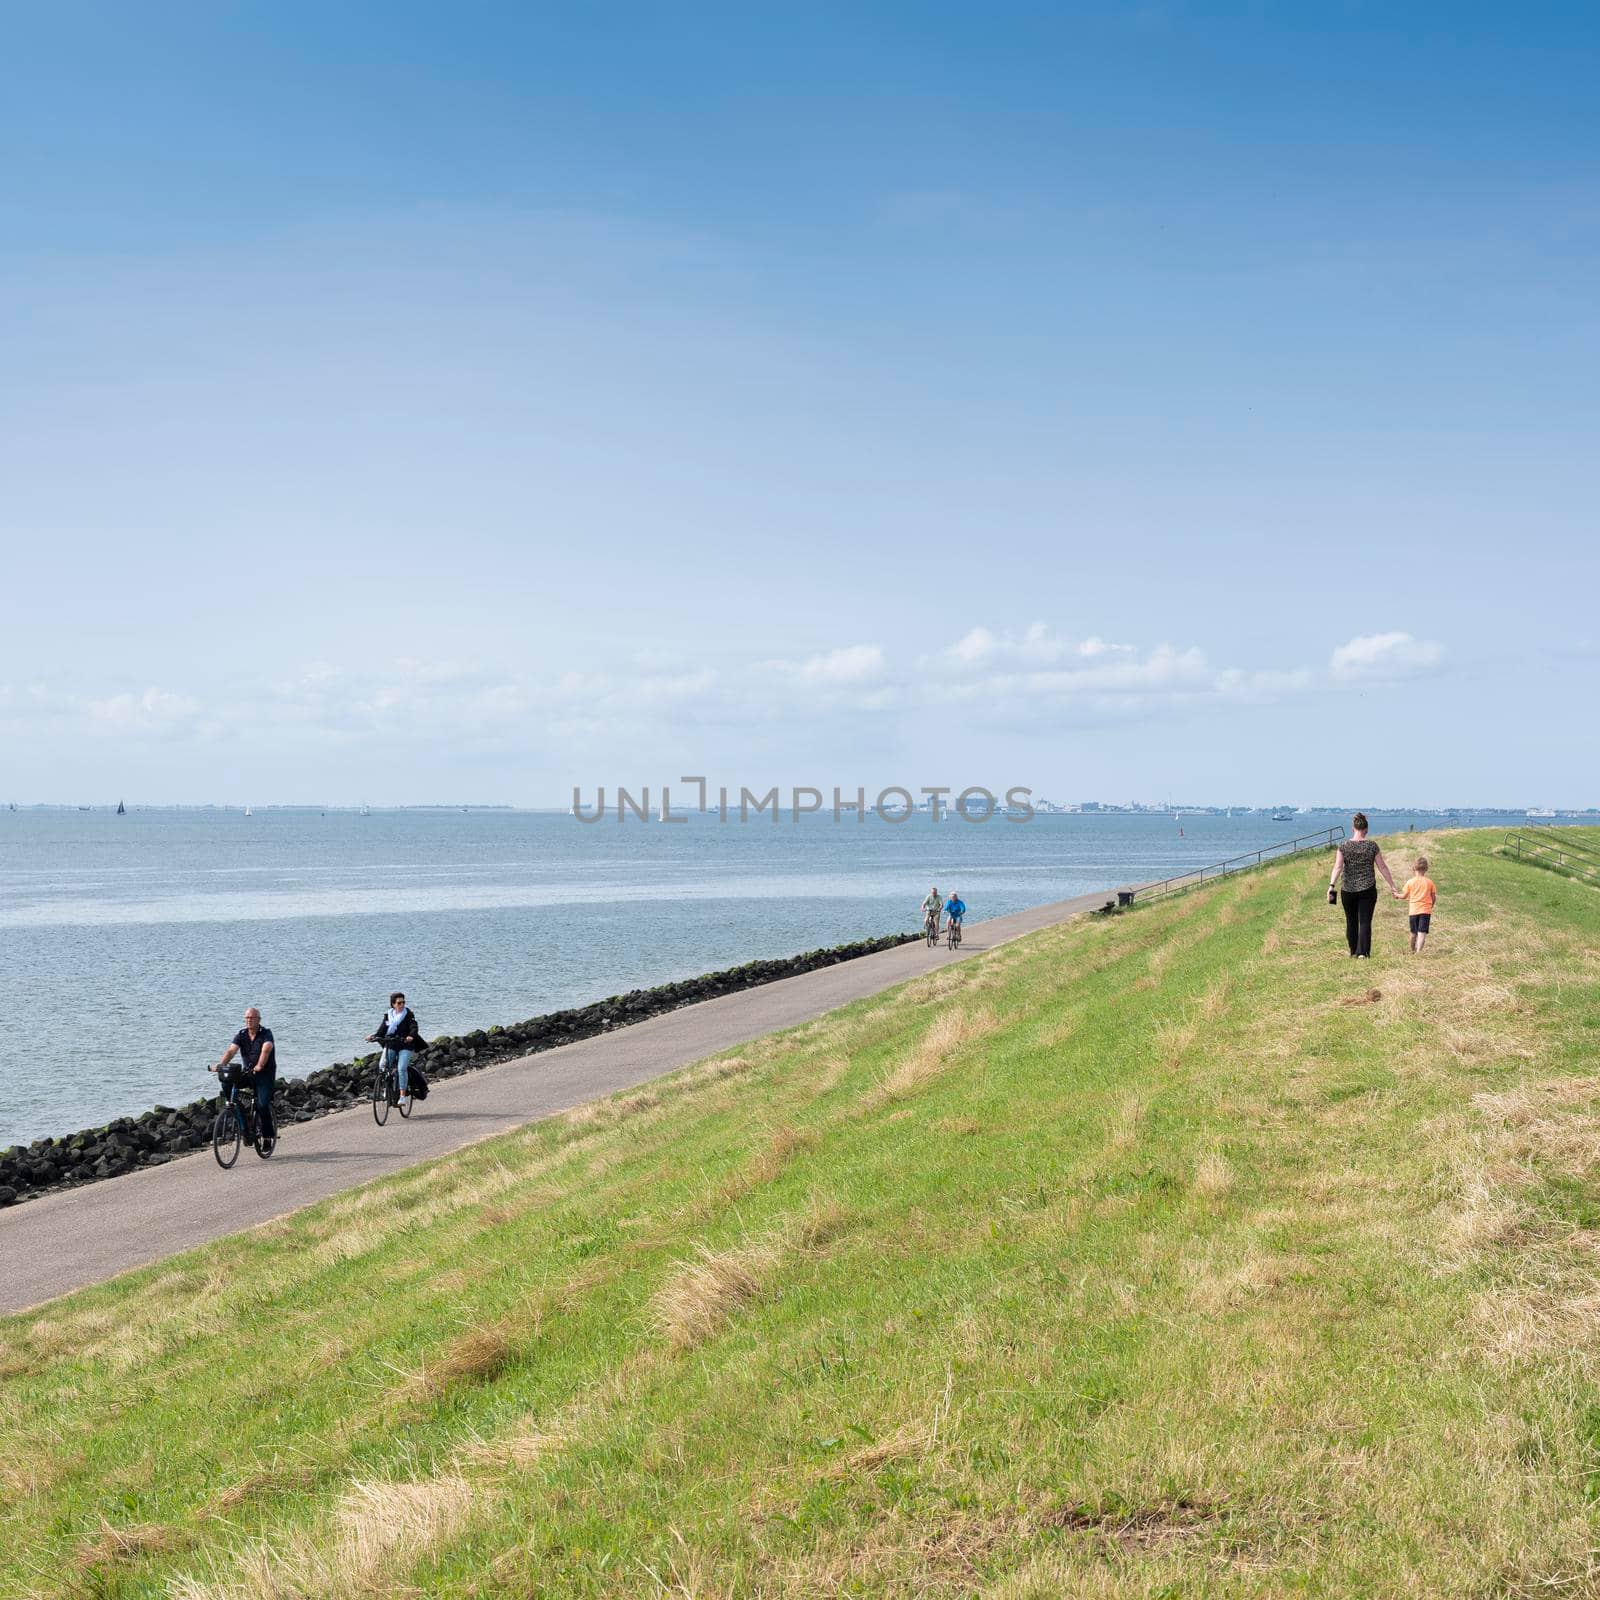 people walk and ride bicycle on dike near oudeschild on the dutch island of texel under blue sky in summer by ahavelaar